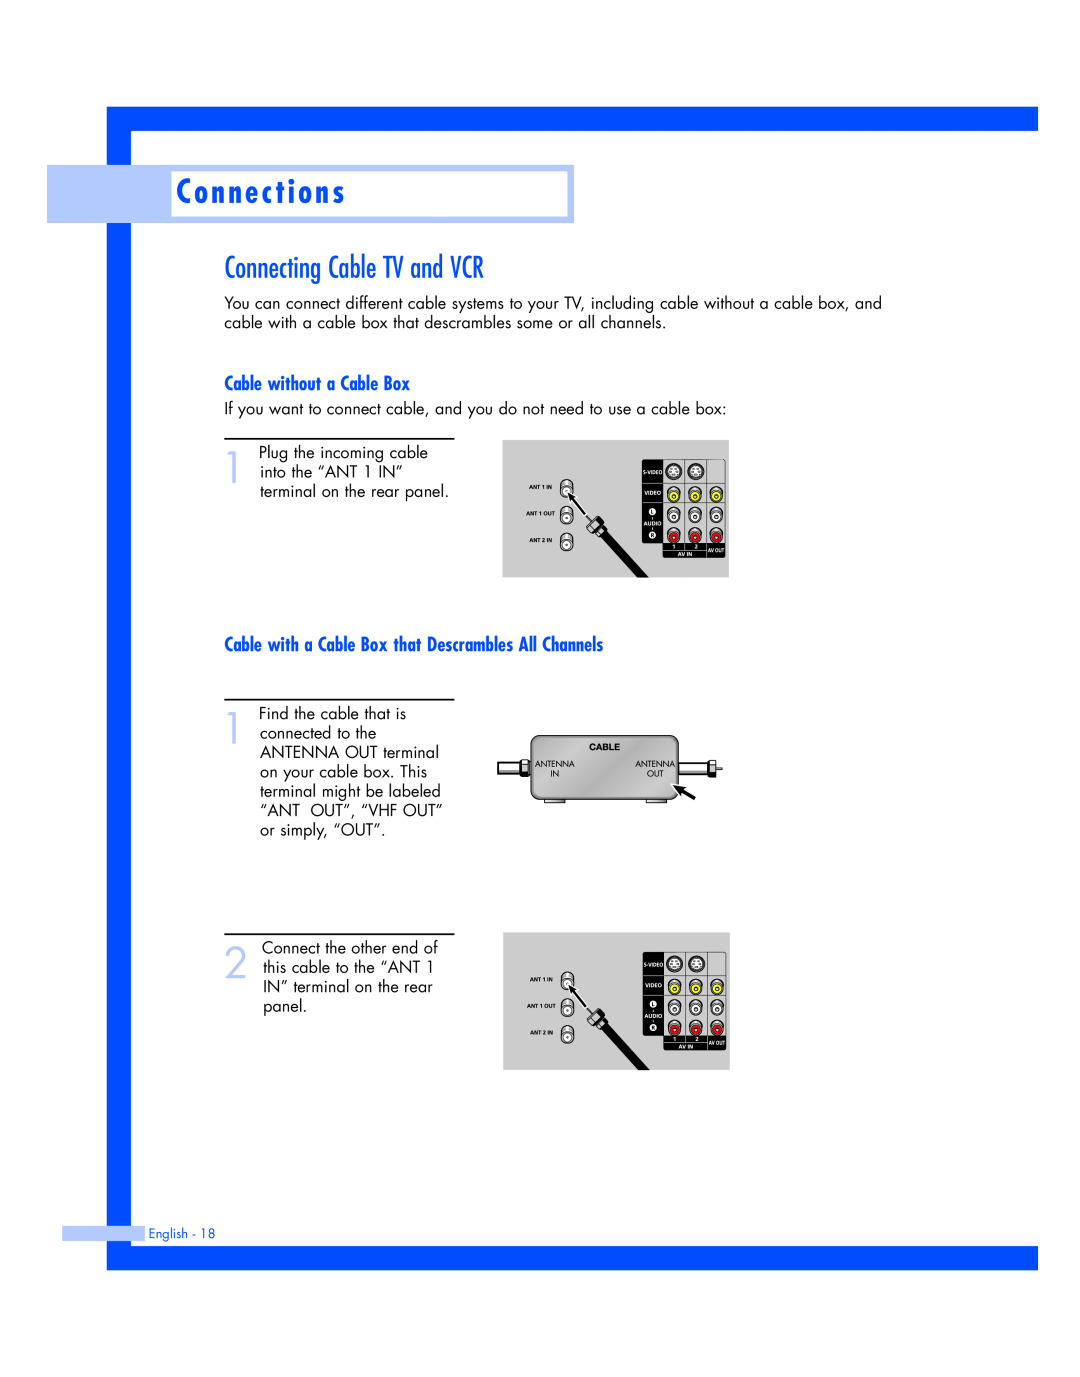 Samsung HL-P4674W instruction manual Connecting Cable TV and VCR, Cable without a Cable Box, C o n n e c t i o n s 